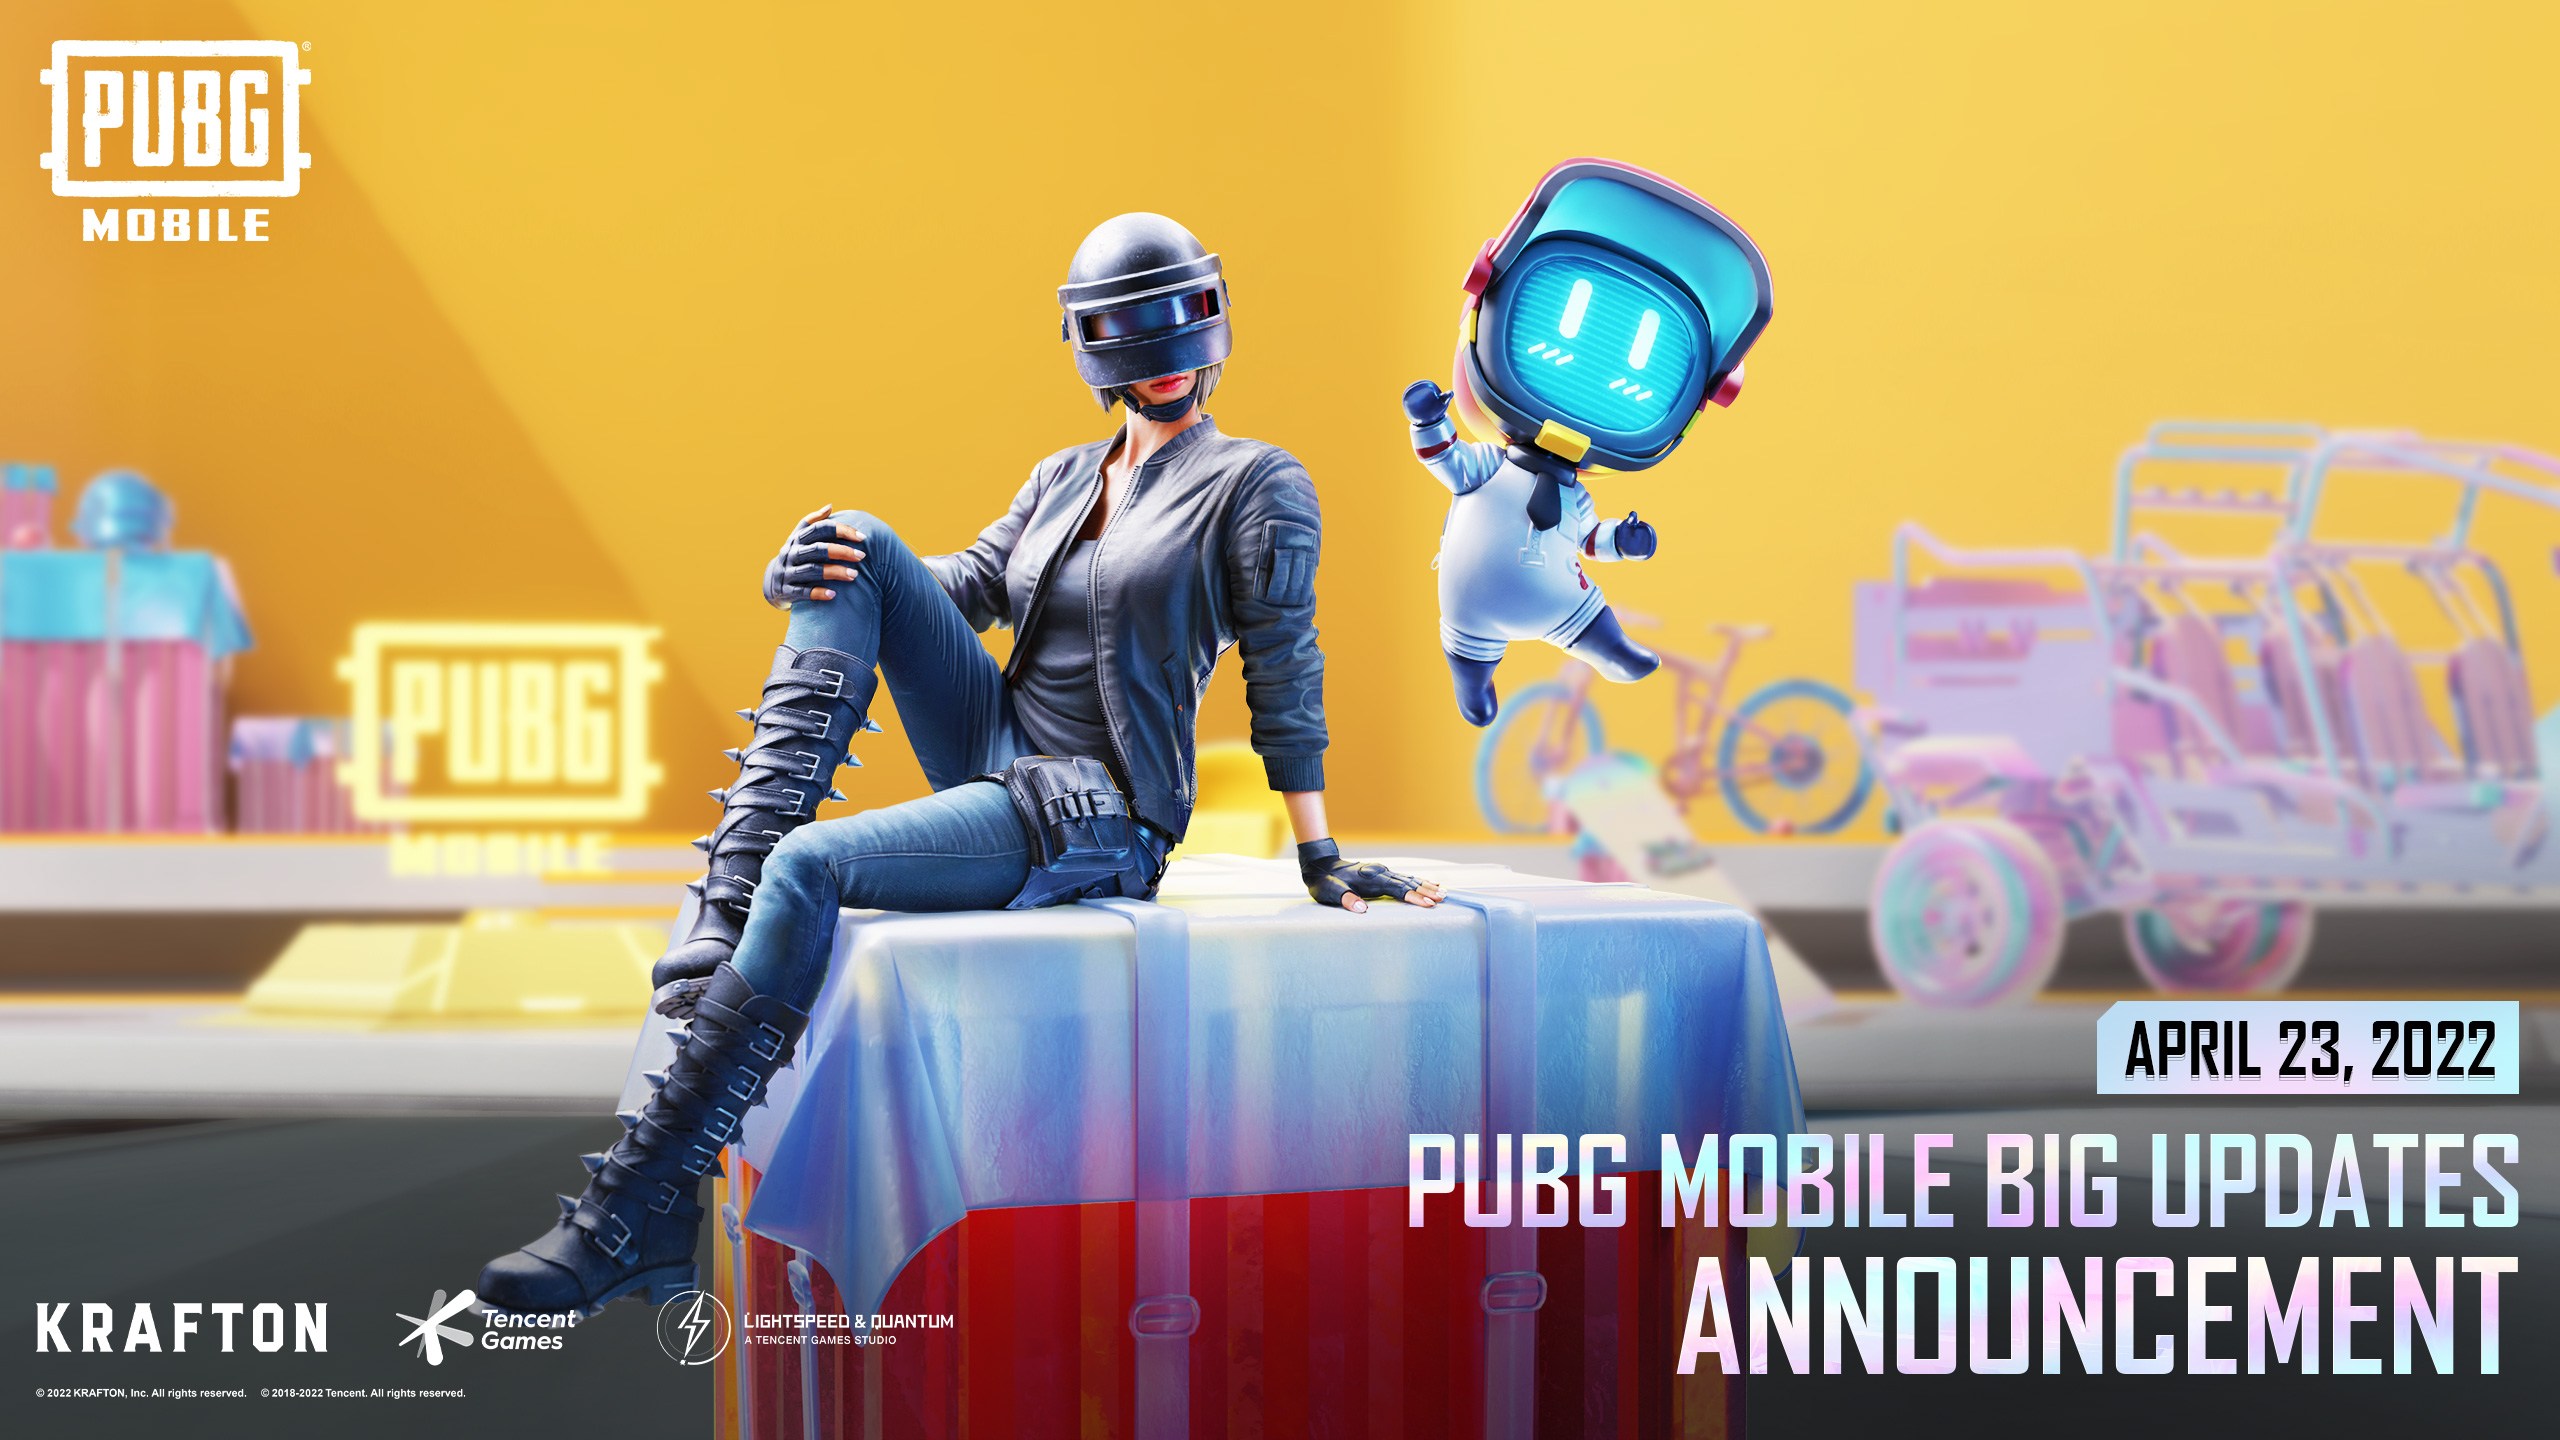 PUBG Mobile Patch Notes 2.0 Launches Official Version of Livik Map, Teases Evangelion-themed Mode, and Many More